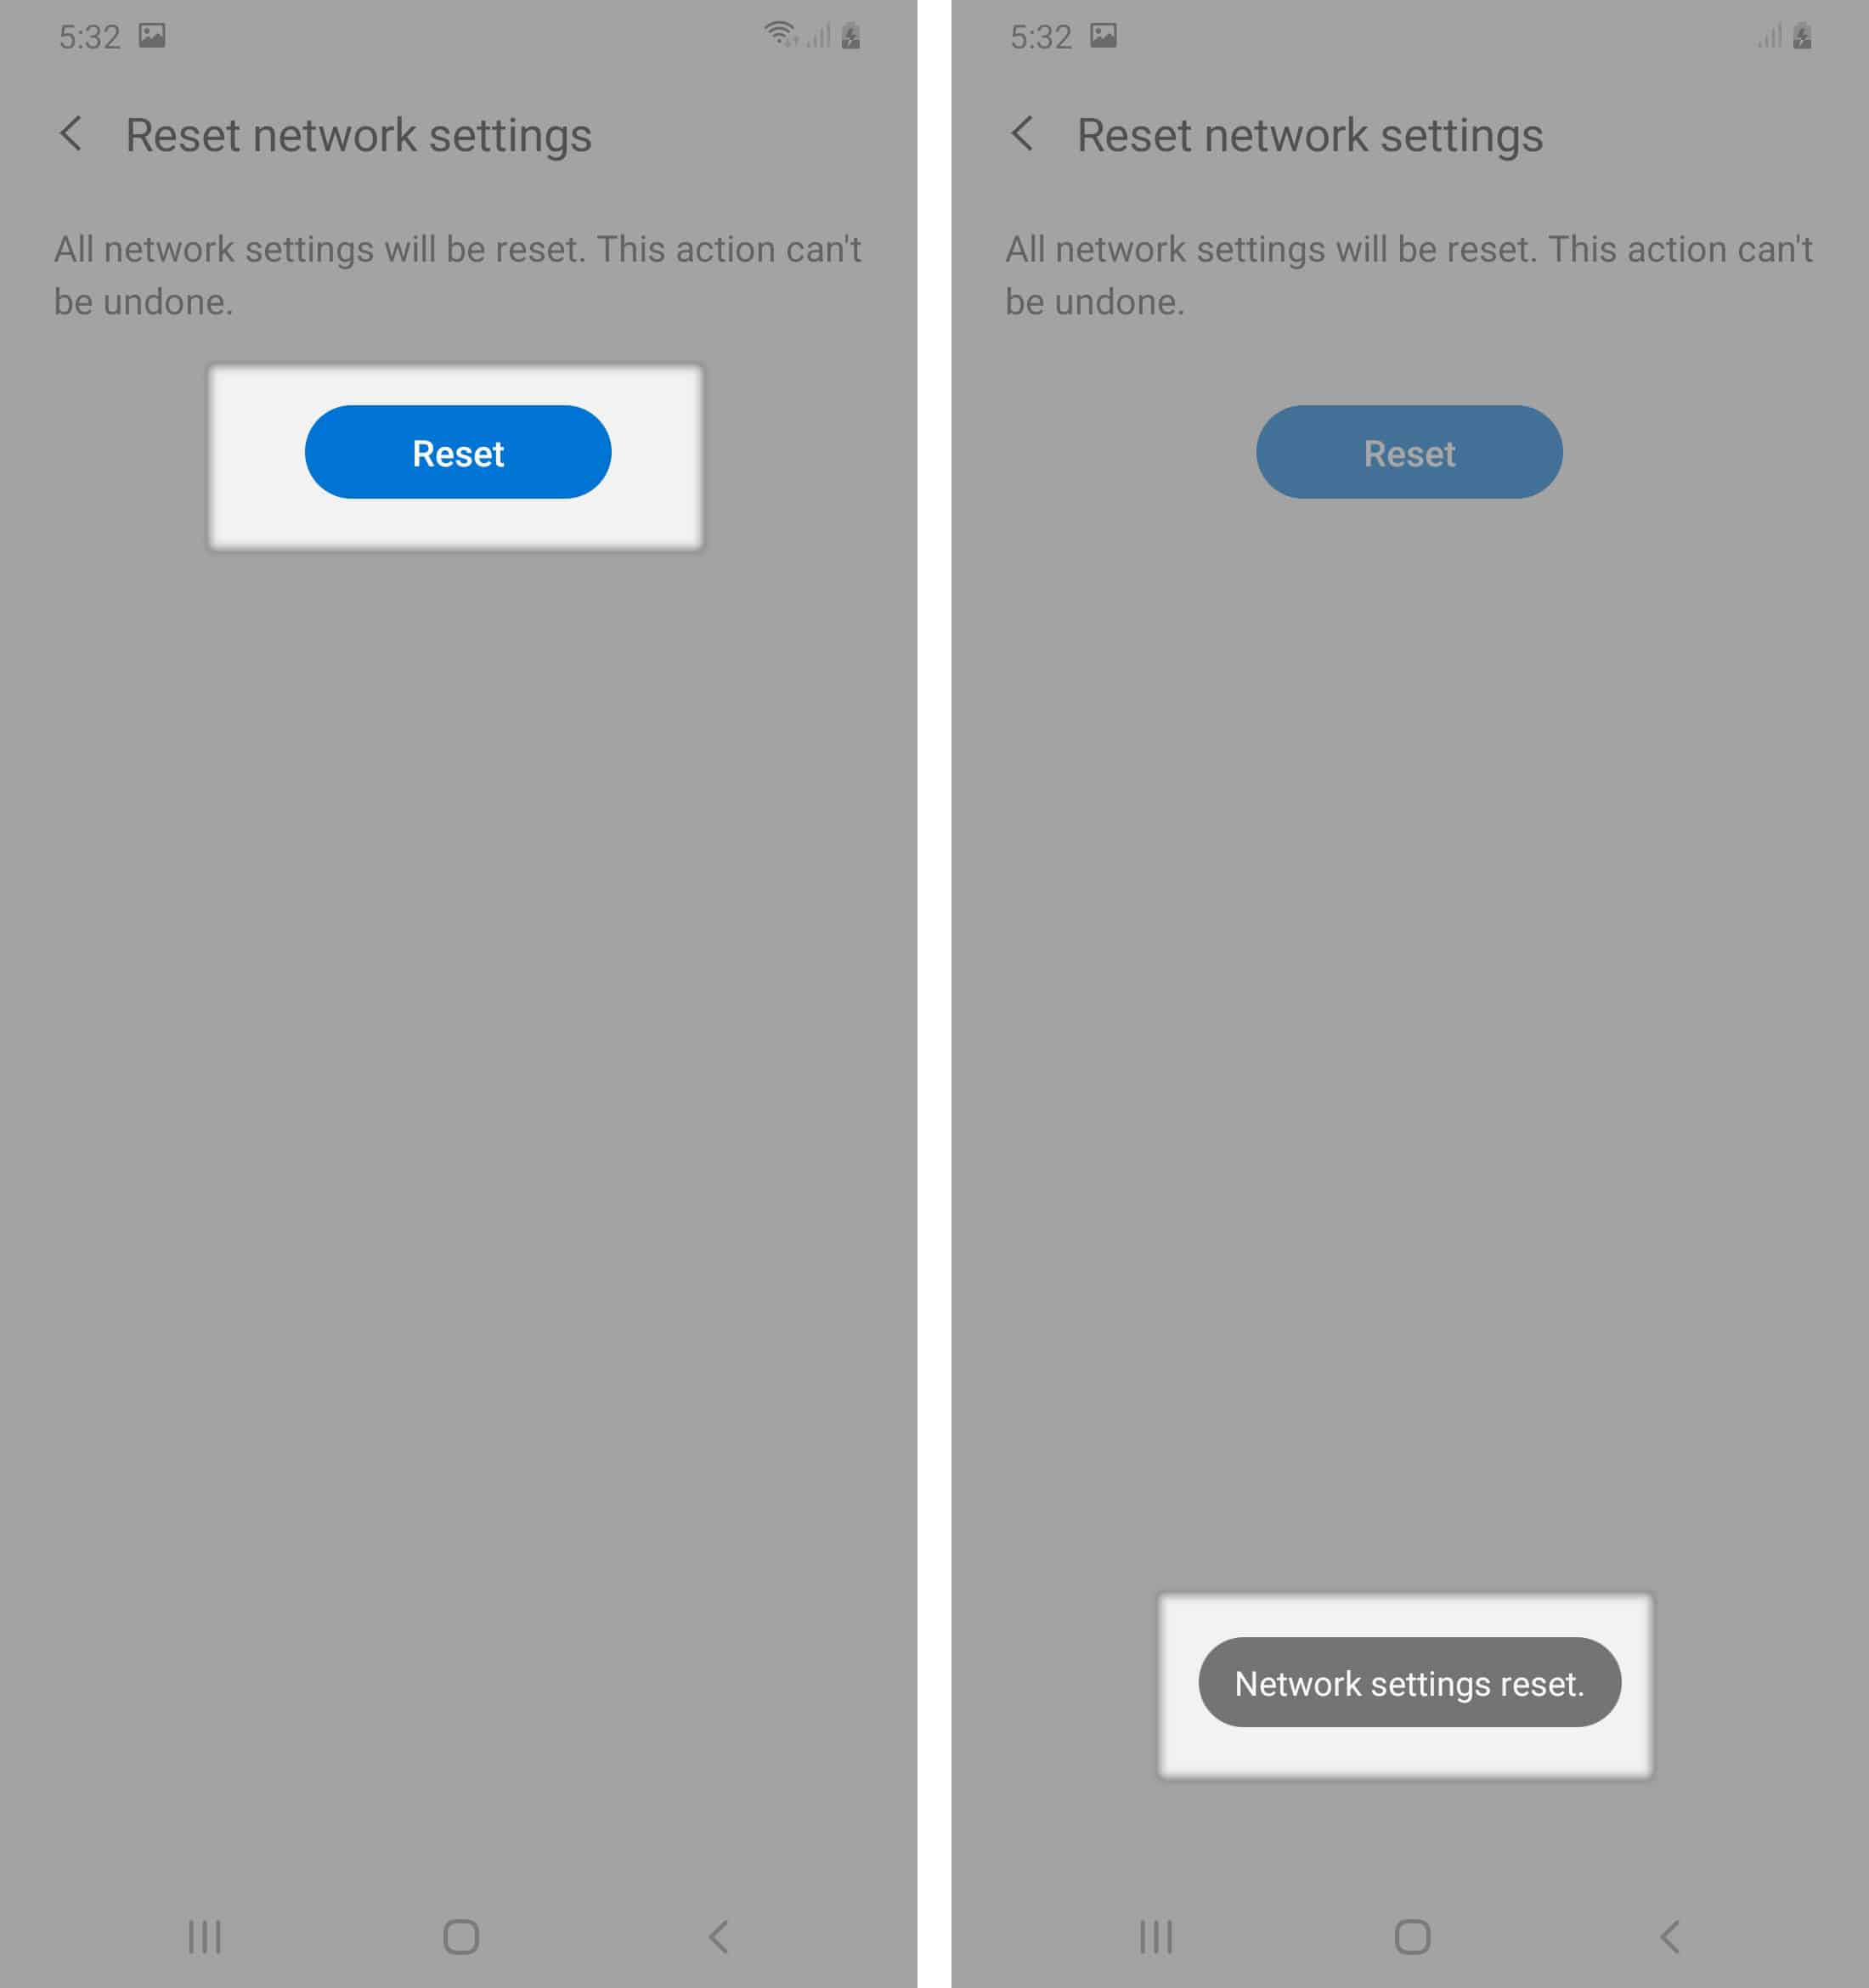 reset galaxy a20 network settings general management reset option reset button done